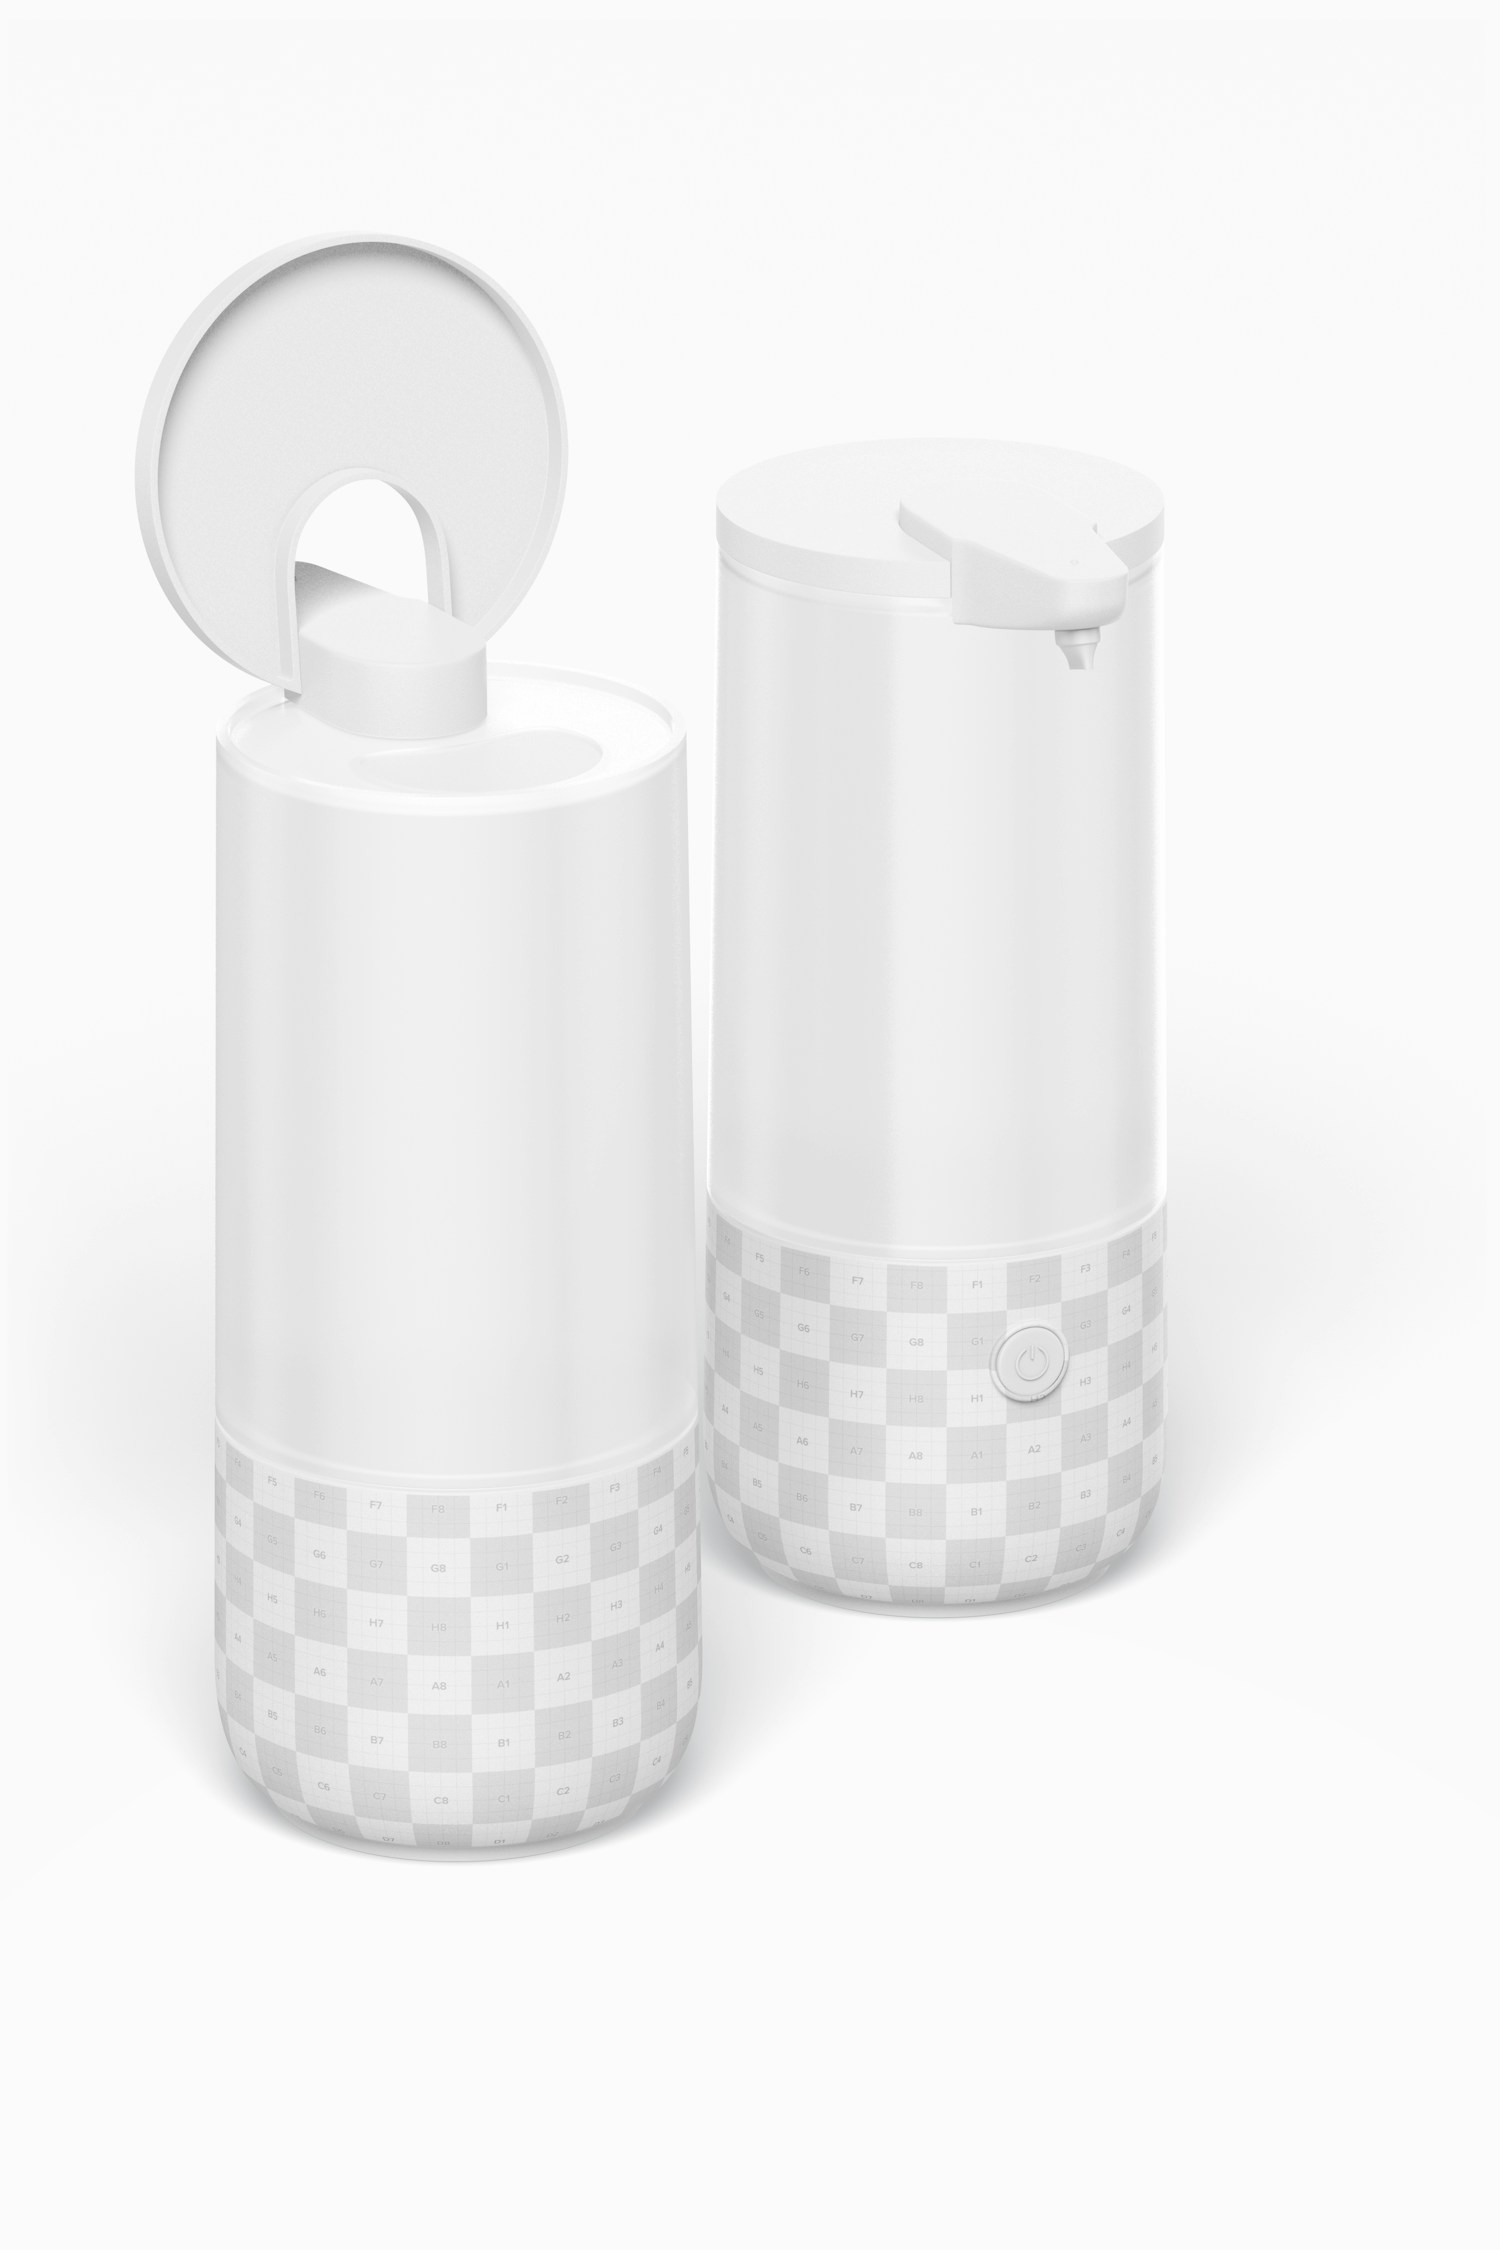 Automatic Soap Dispensers Mockup, Opened and Closed